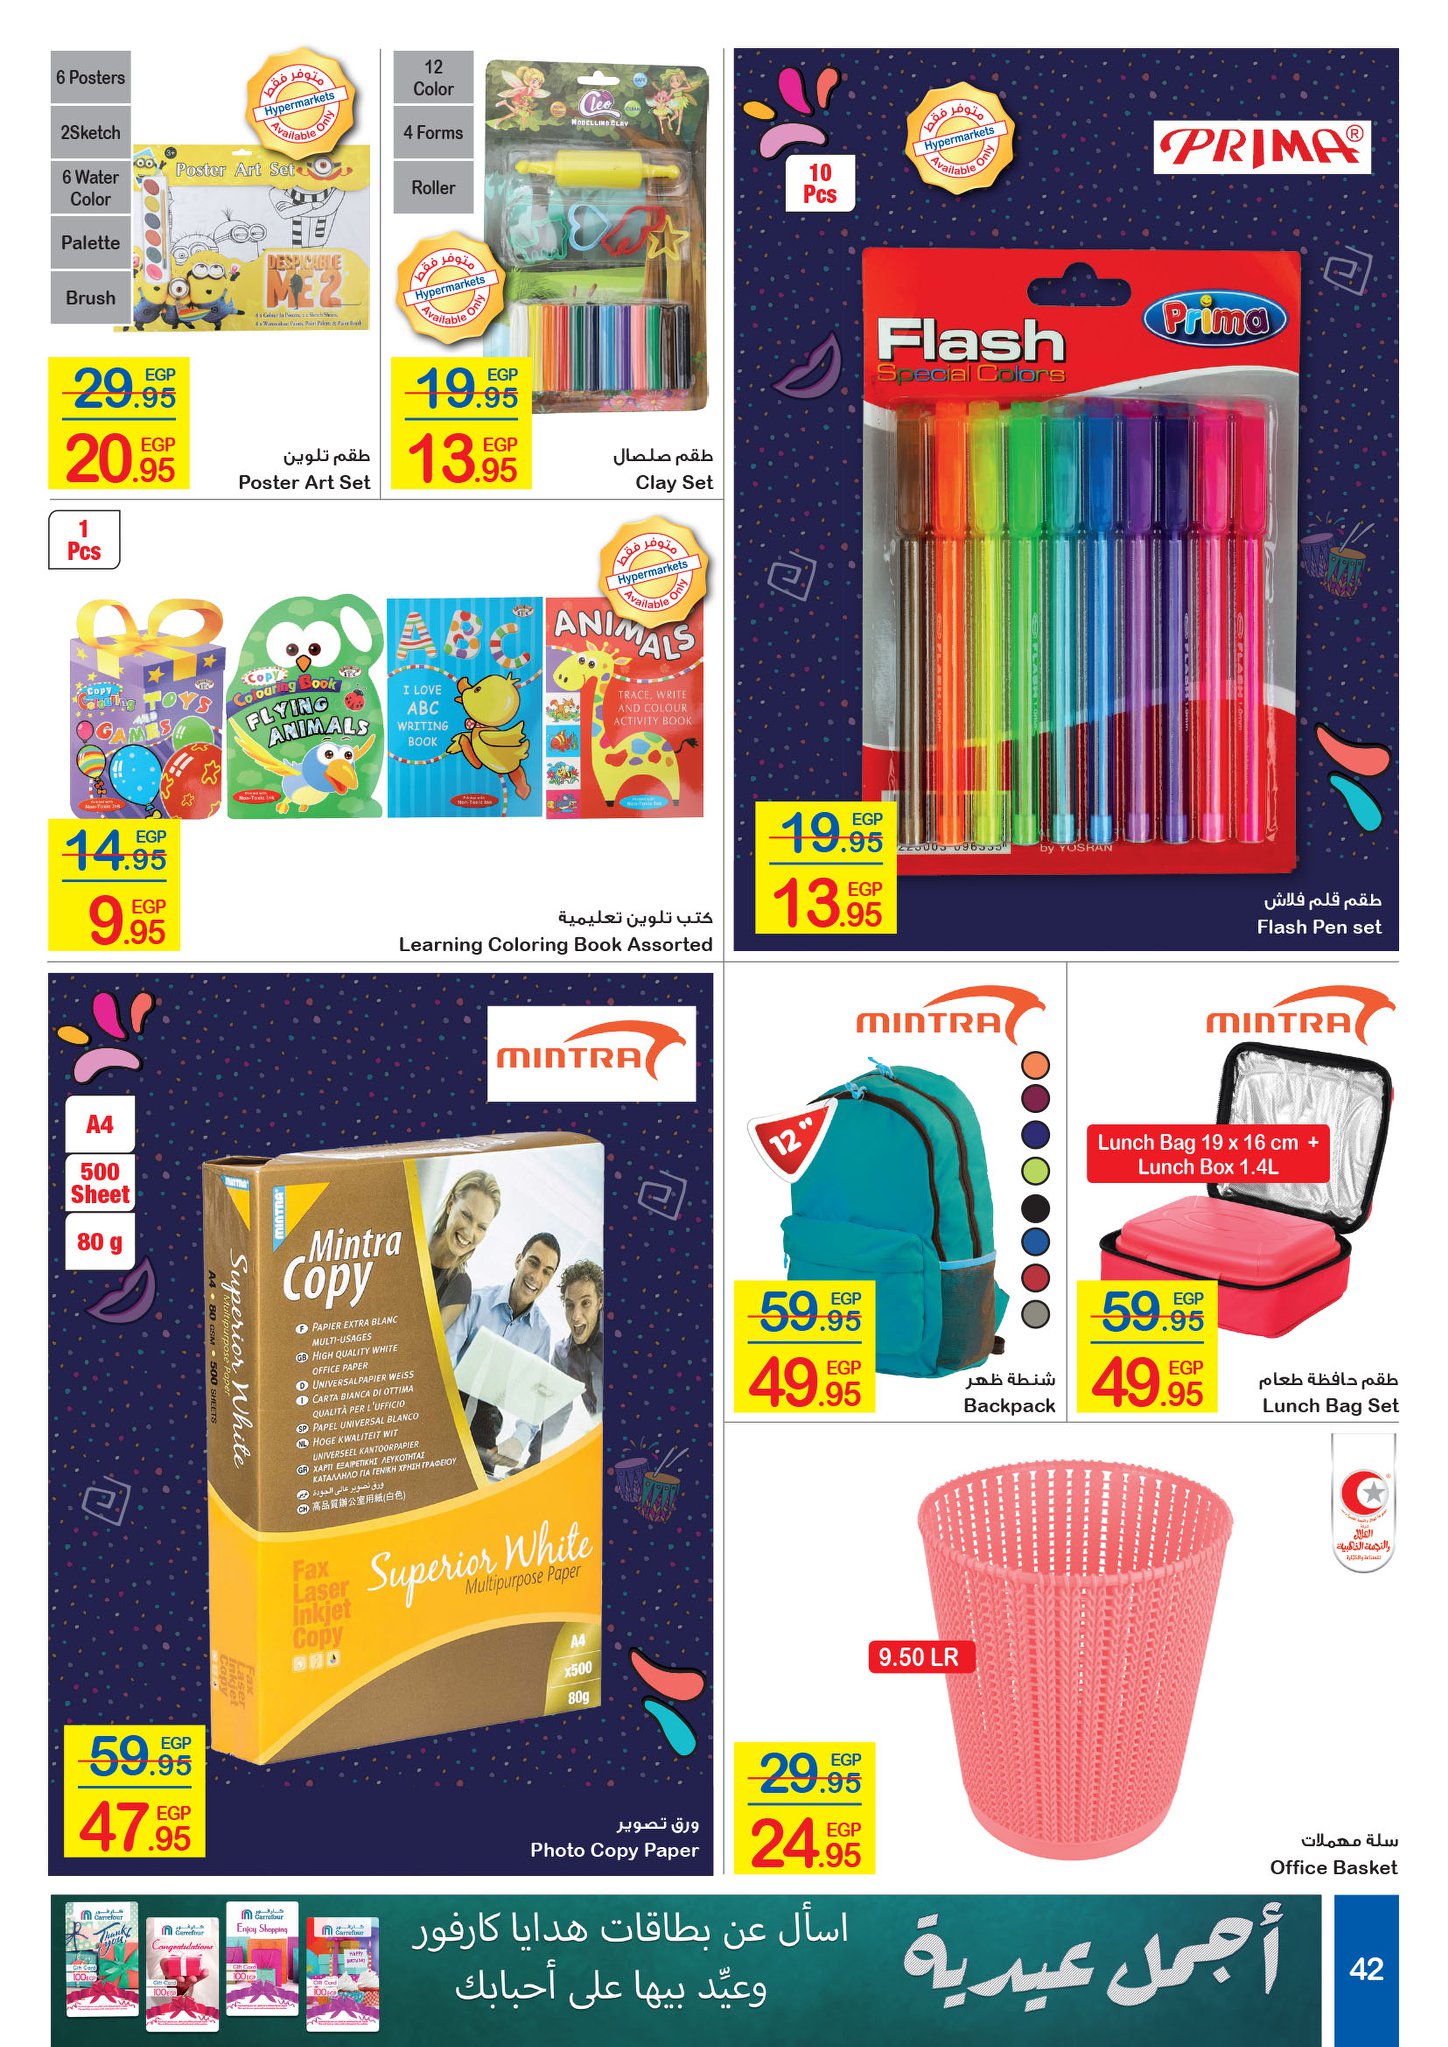 Carrefour Flyer from 16/7 till 27/7 | Carrefour Egypt 41